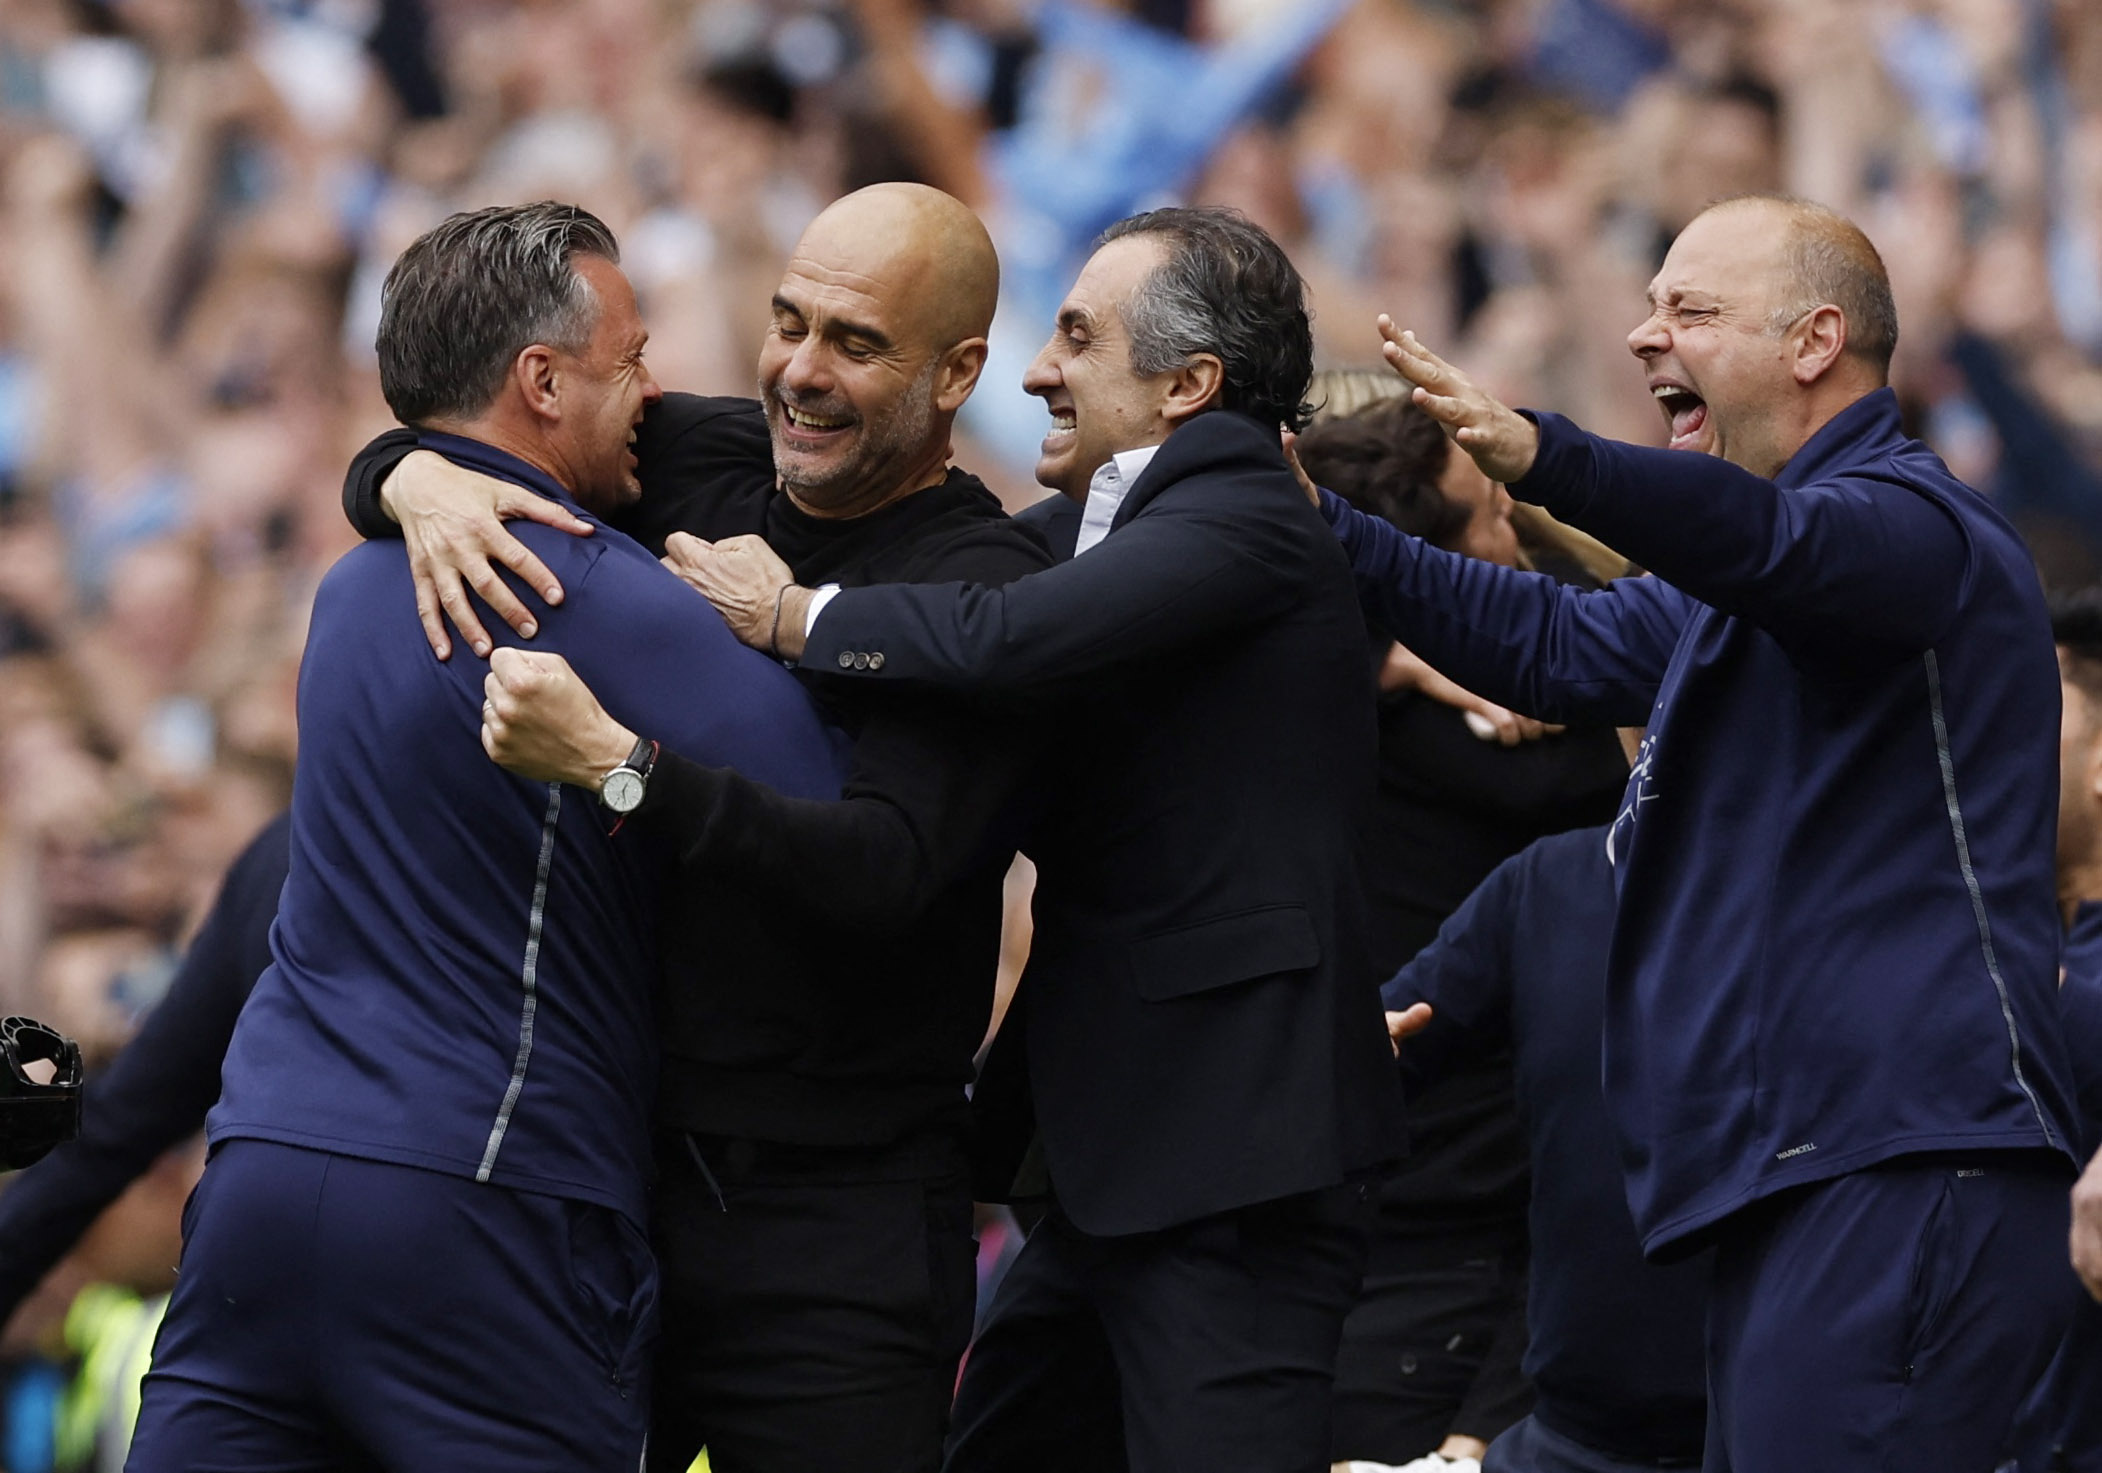 Pep's initial celebration with his collaborators seconds after the end of the game against Aston Villa (Photo: Reuters)